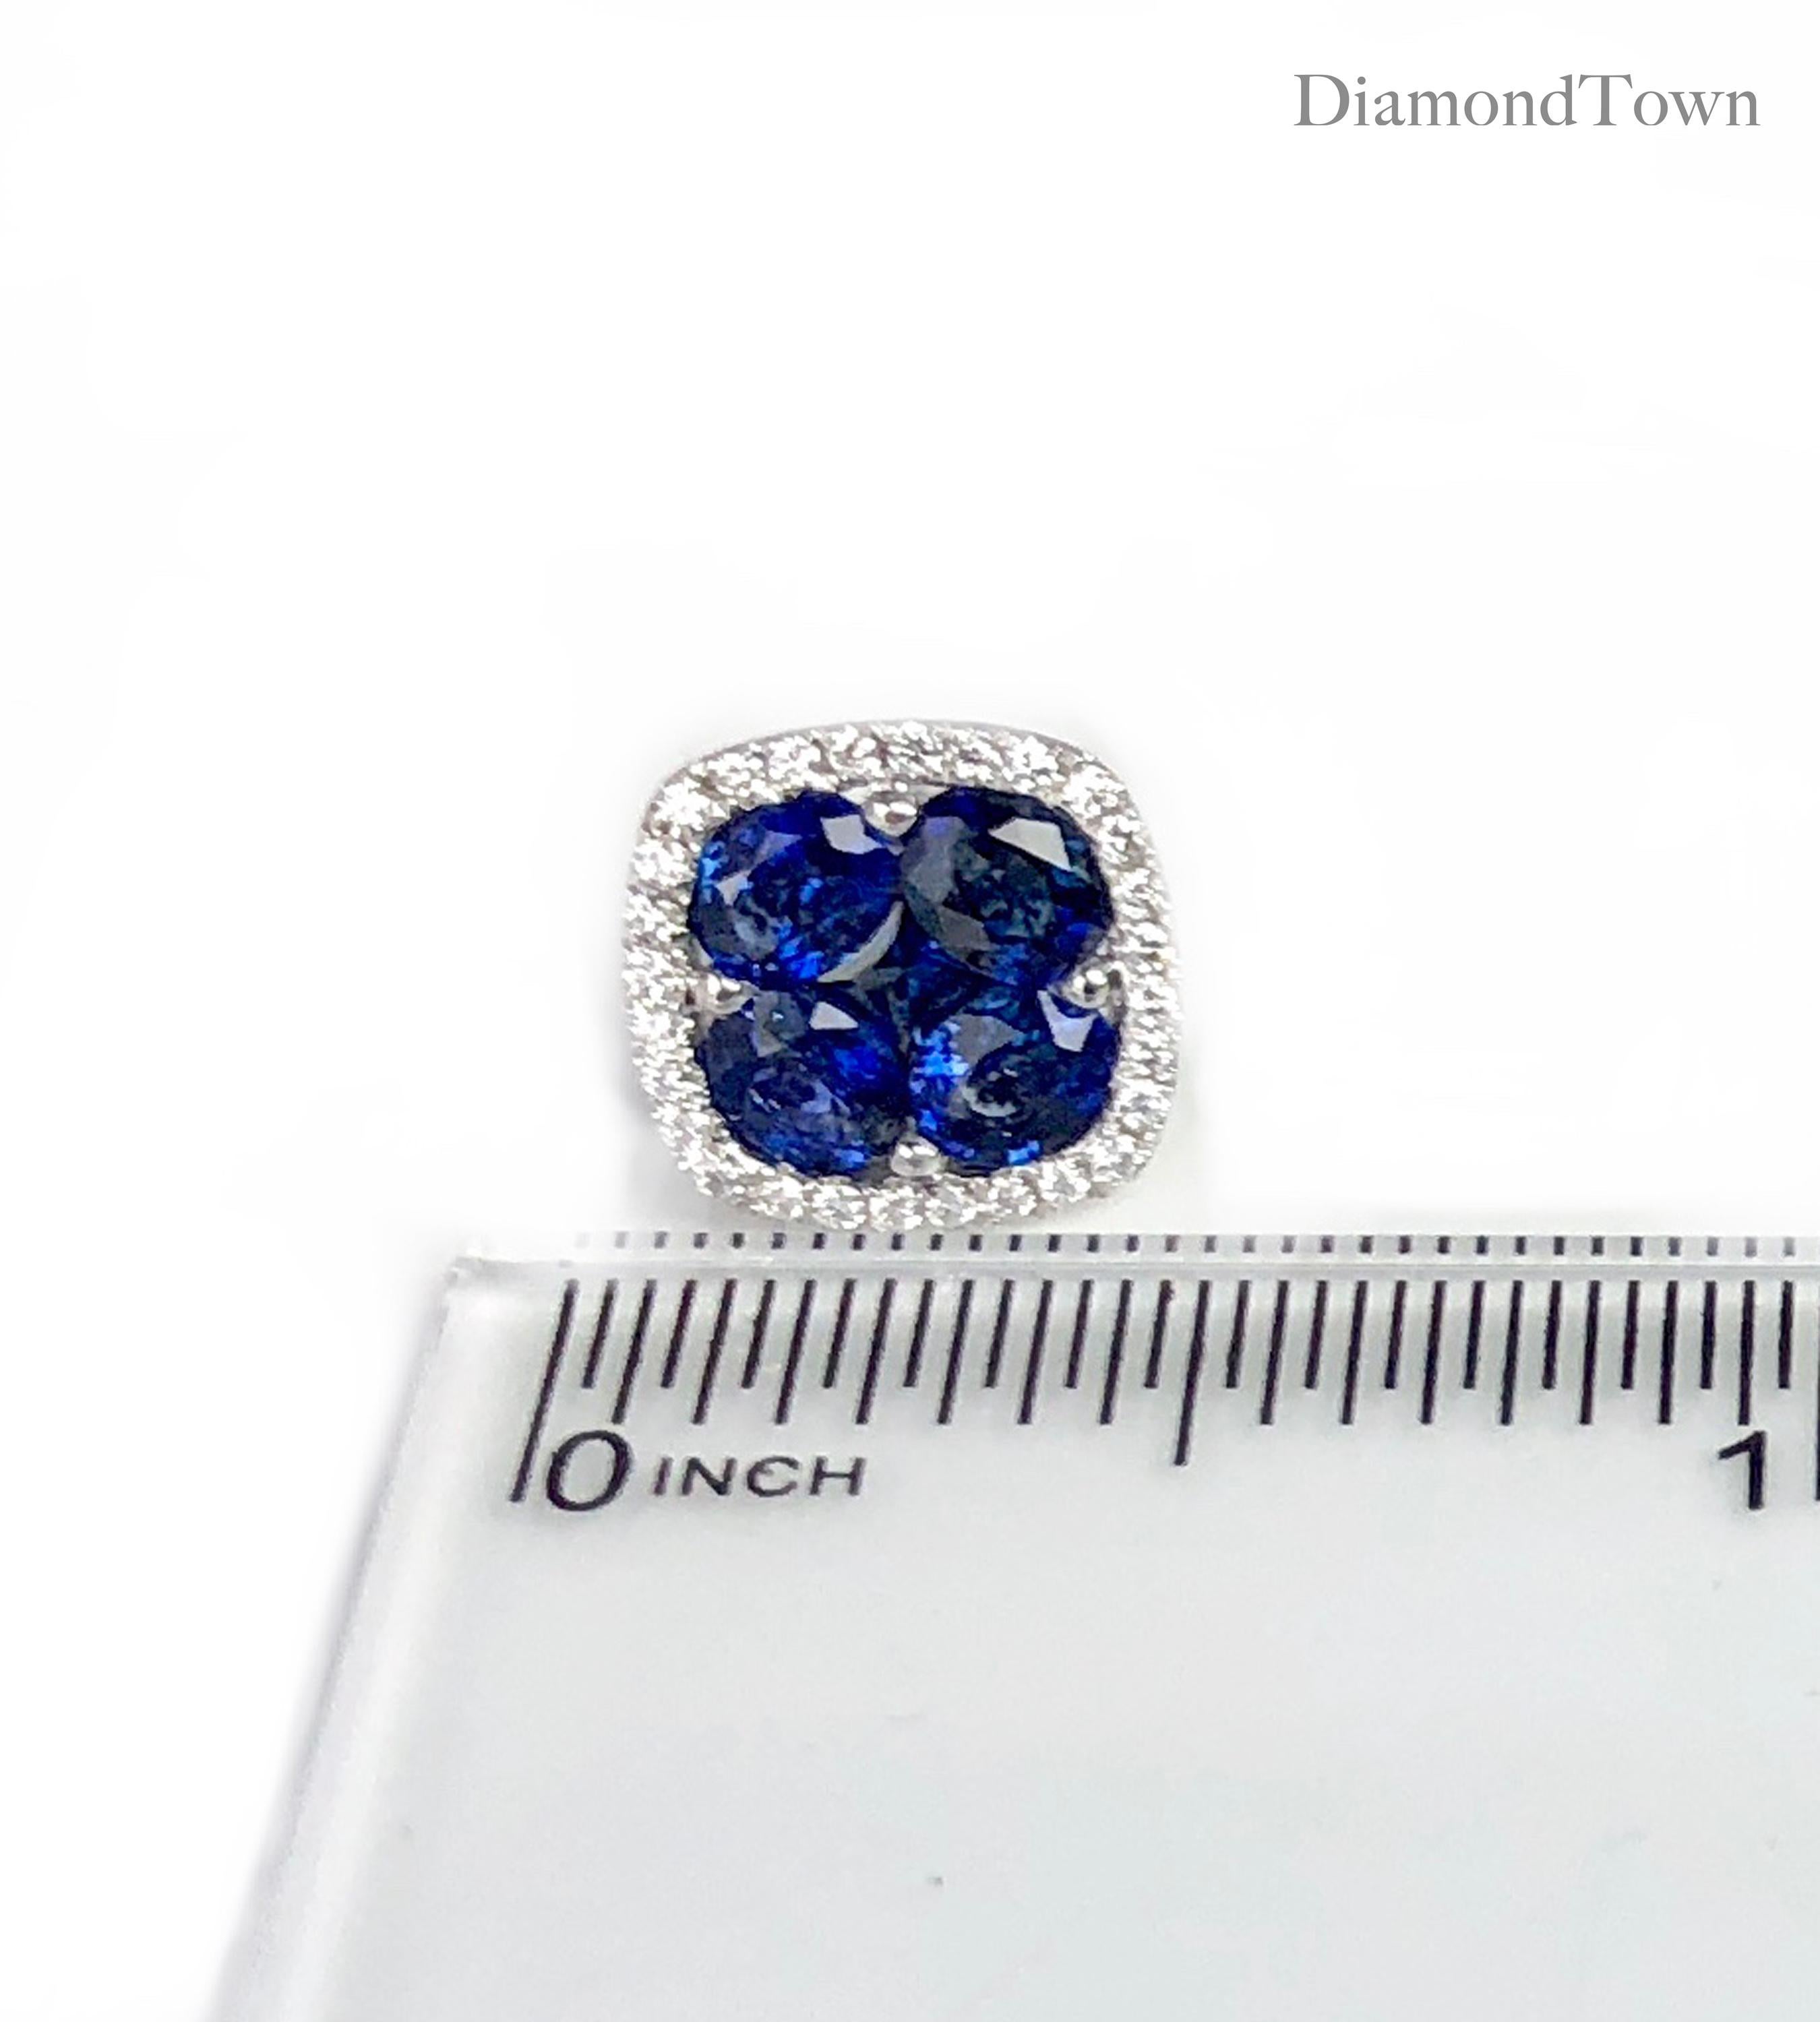 Mixed Cut 2.6 Carat Sapphire and 0.21 Carat Diamond Stud Earrings in 18W Gold ref1678 For Sale